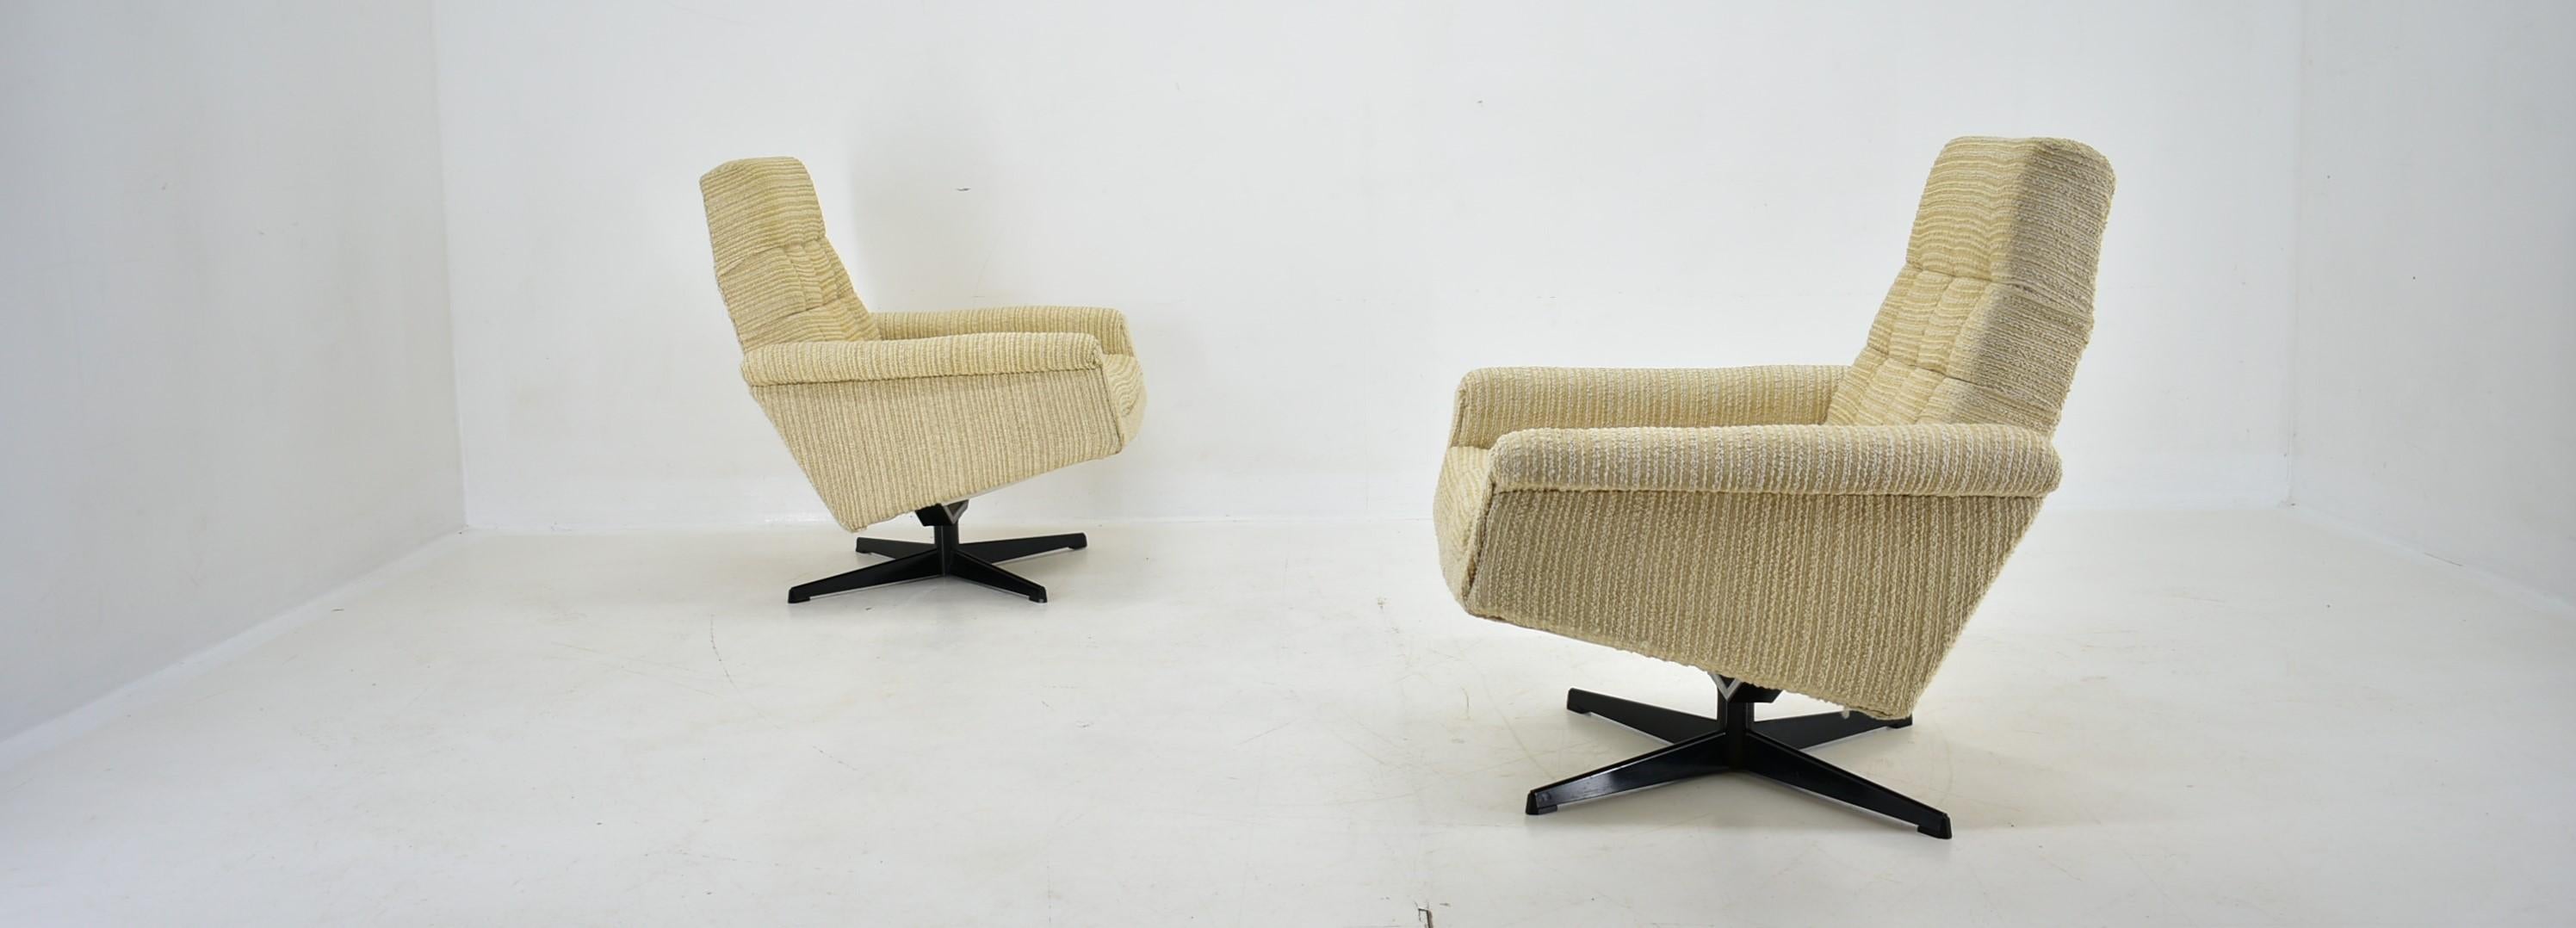 Pair of Armchairs, Tabouret by Morávek a Munzar, 1968s For Sale 8